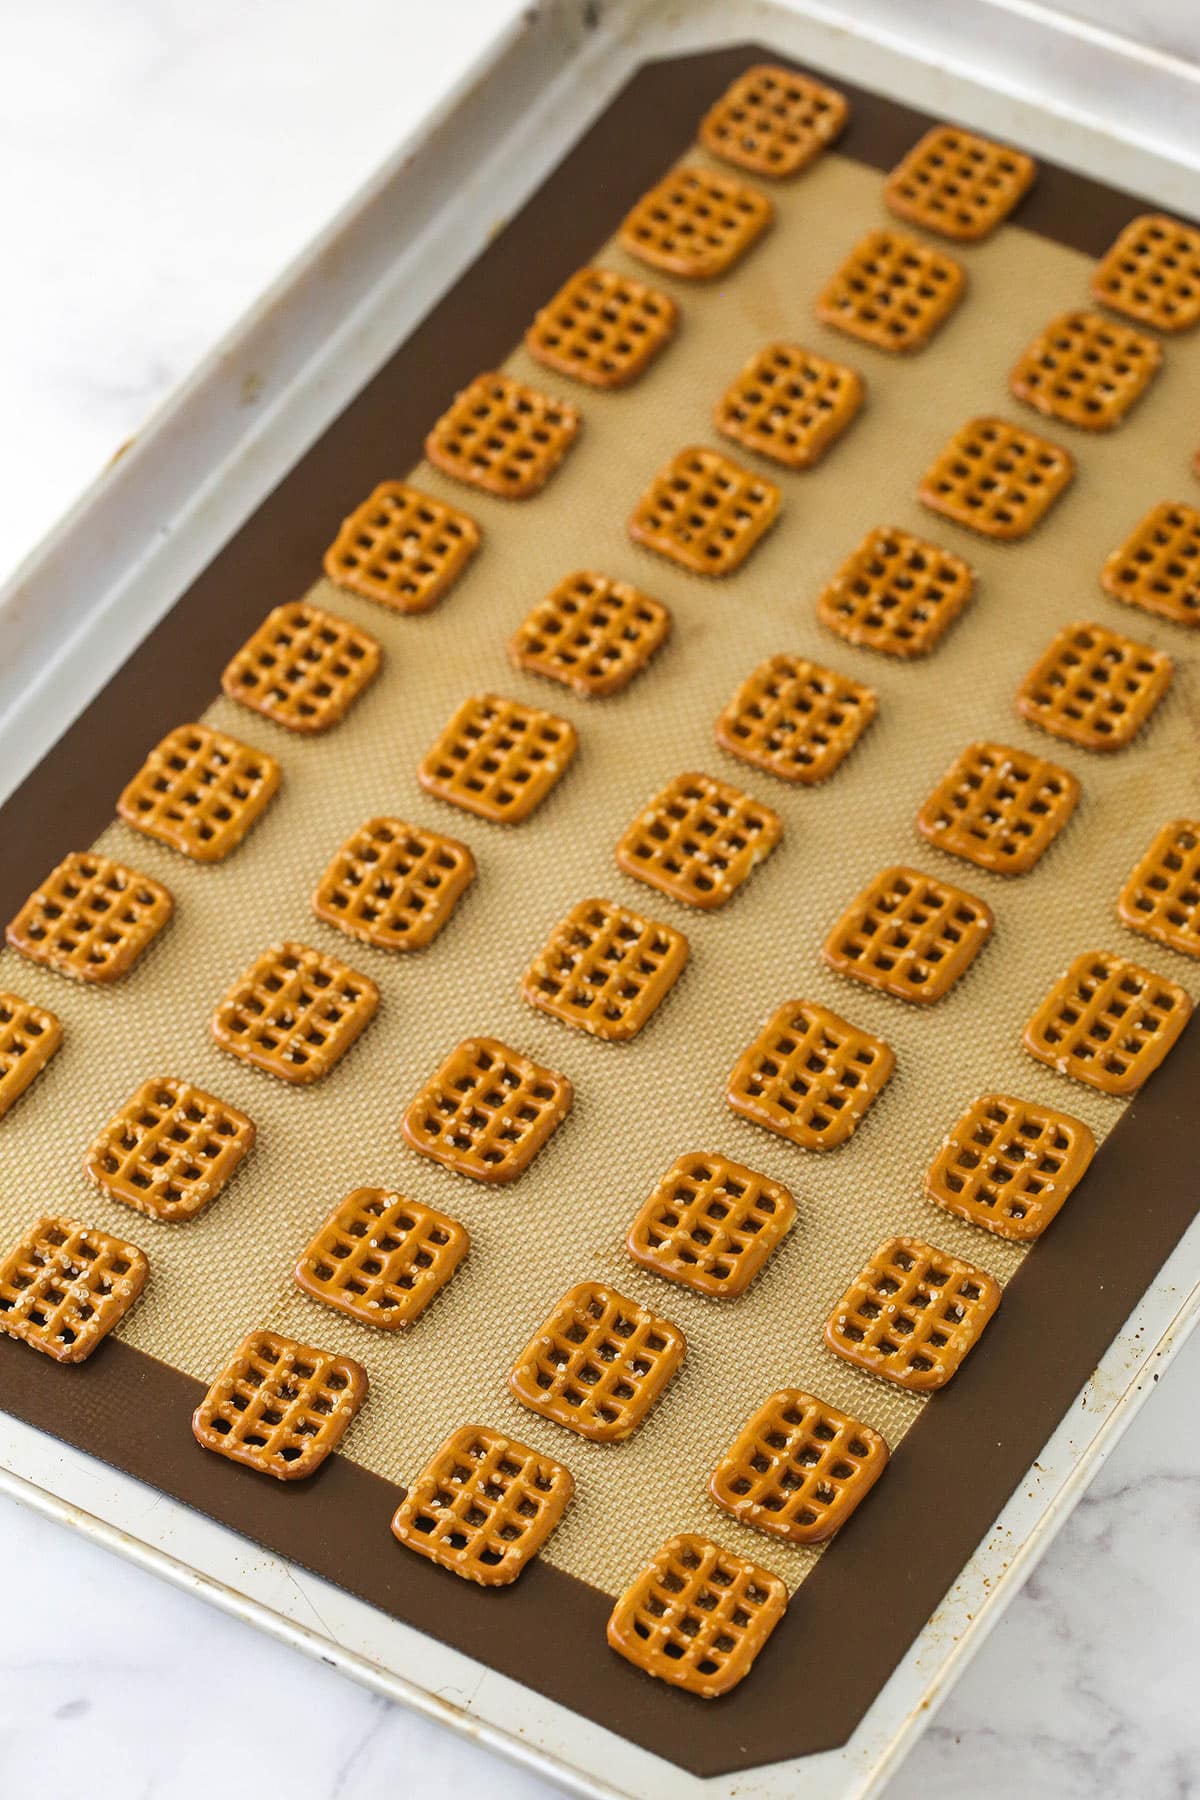 lots of square pretzels laid out on silicone baking mat on baking sheet